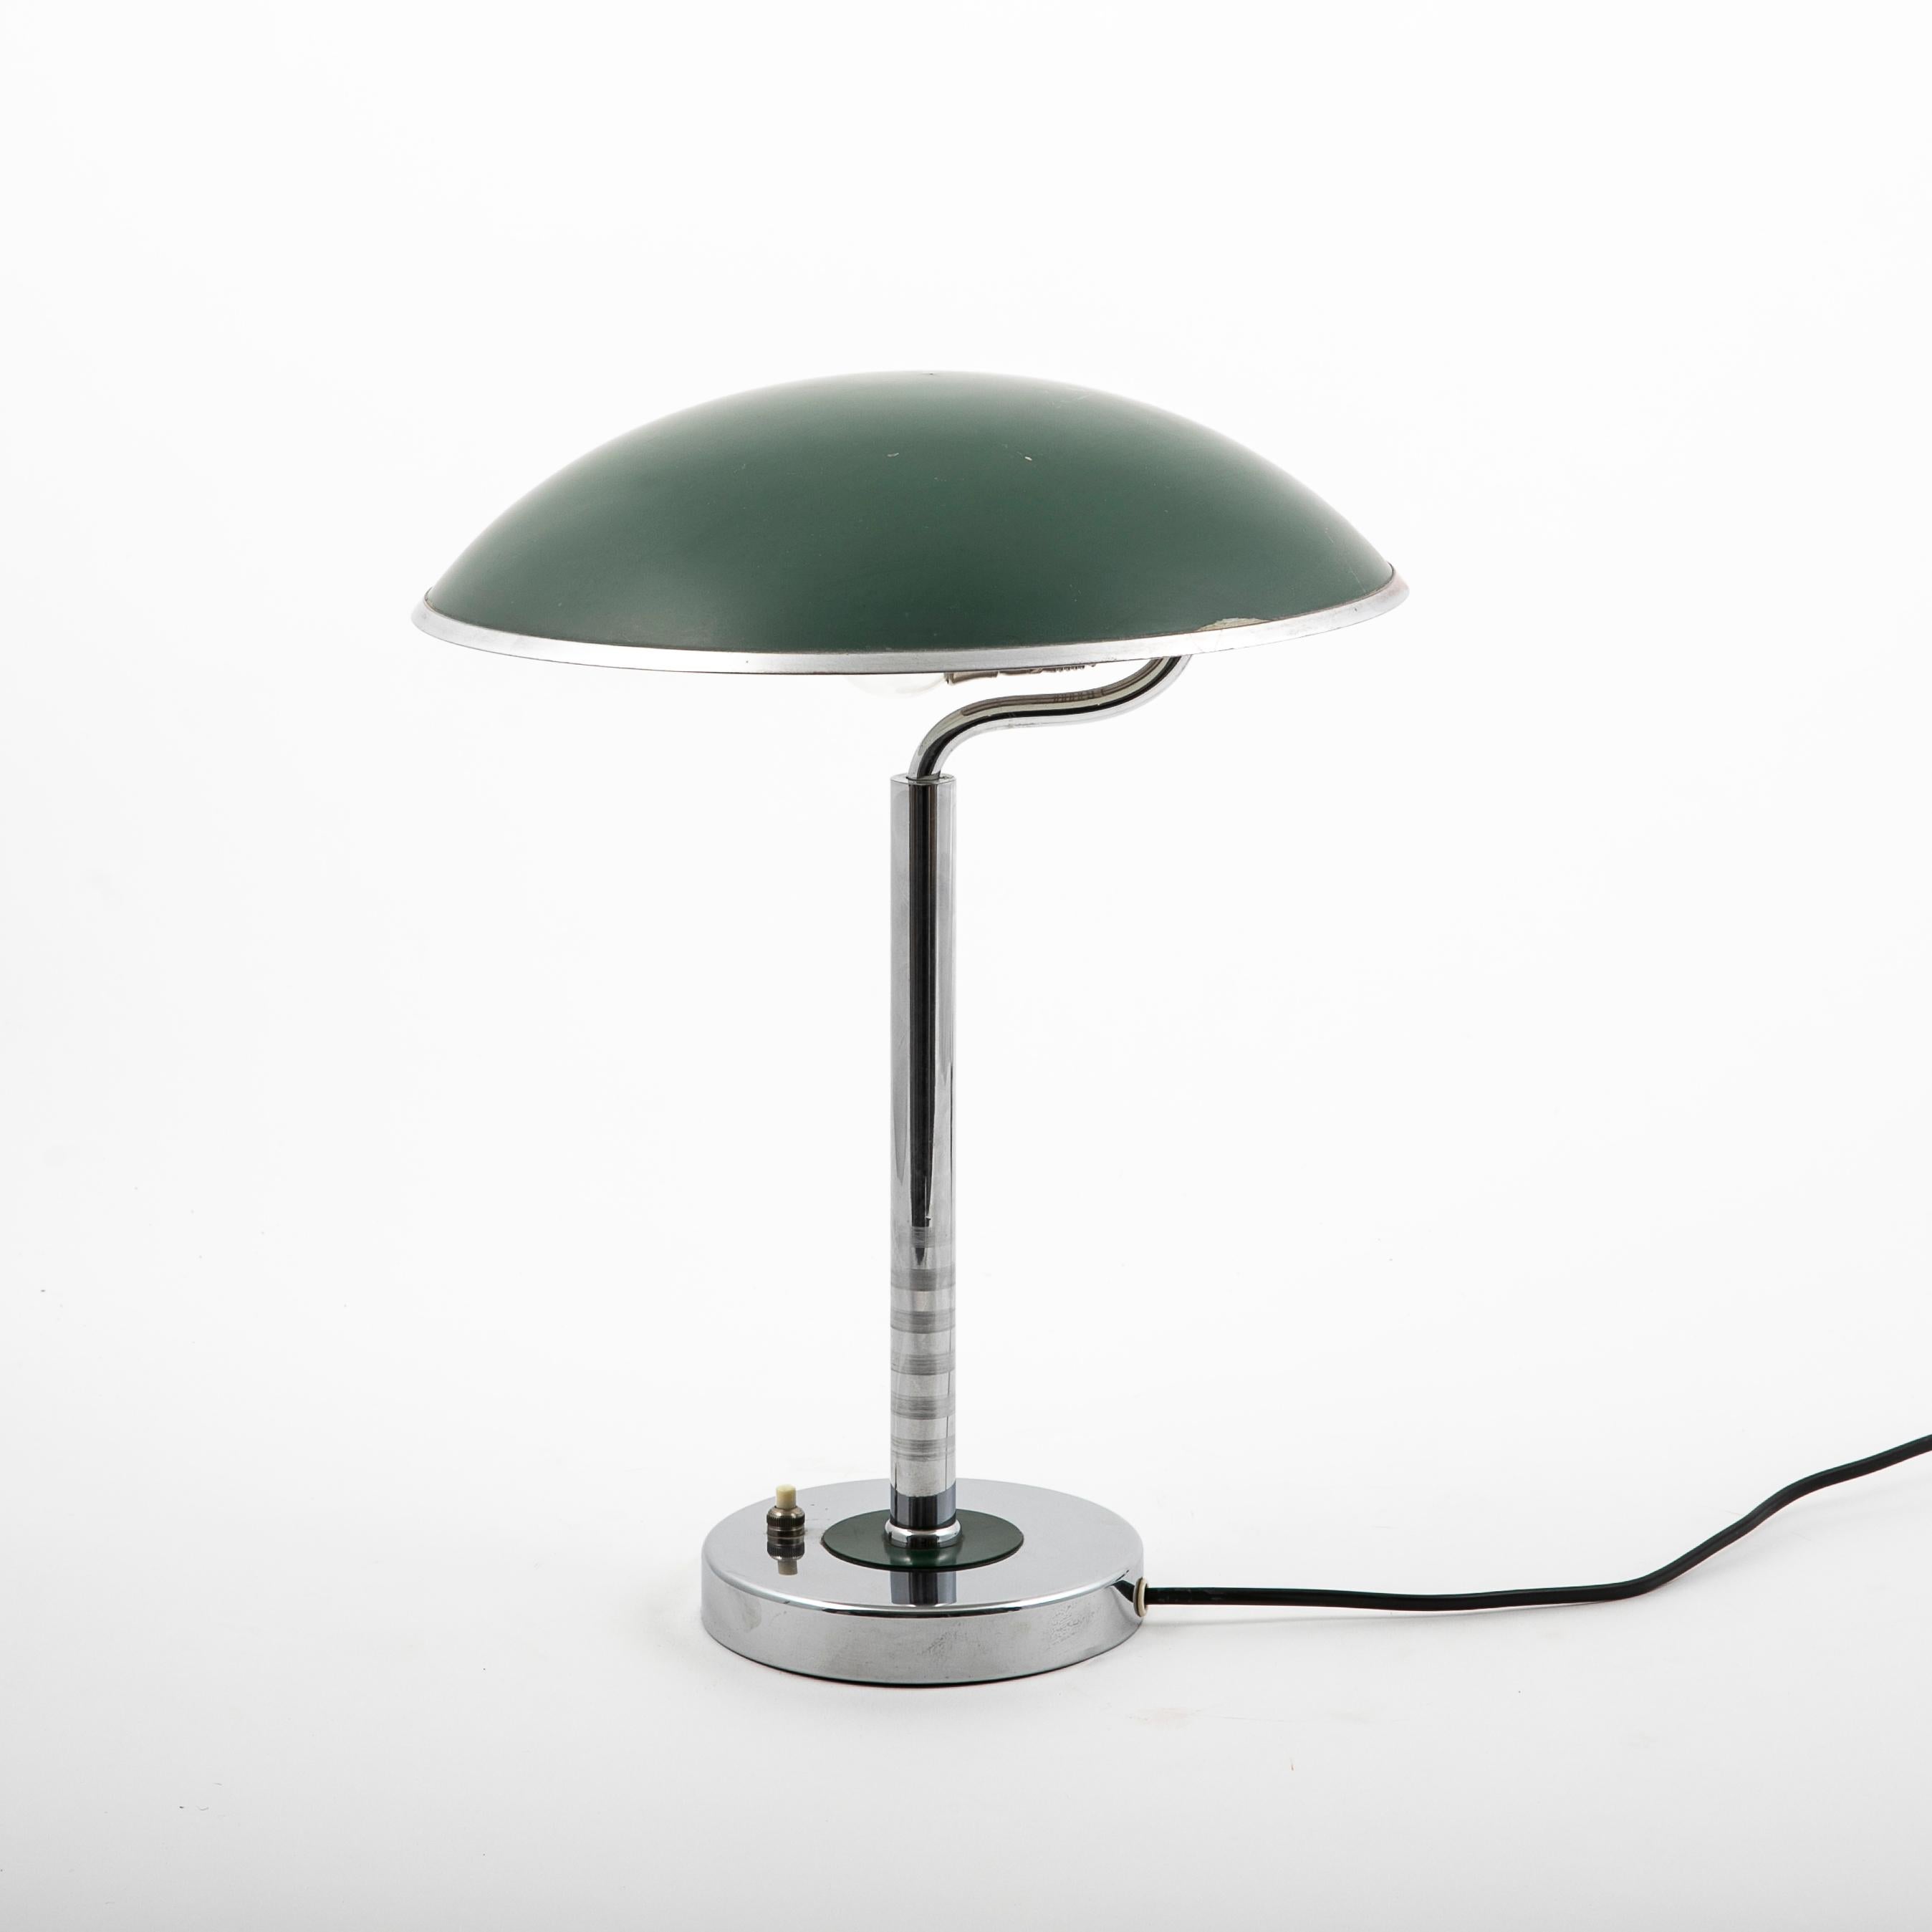 A Swedish art deco chrome plated brass desk lamp.
Bauhaus style.
Green spherical shade painted white on the inside.
Shade diameter: 29 cm.
Base with green ring at the stem. On/Off switch at the base.
Original and untouched condition.
Sweden c.